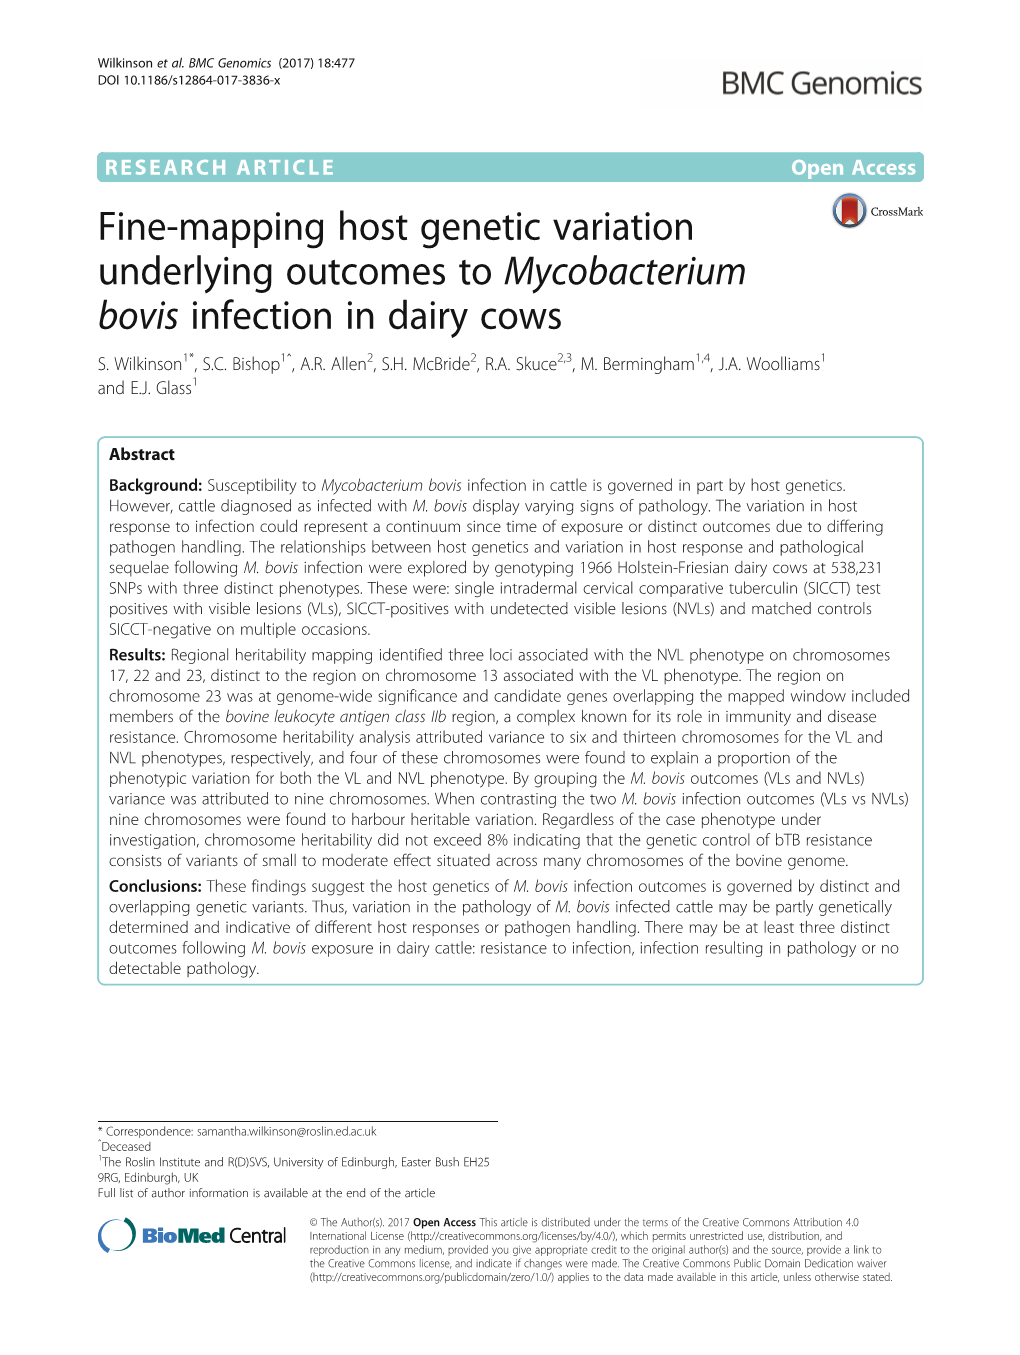 Fine-Mapping Host Genetic Variation Underlying Outcomes to Mycobacterium Bovis Infection in Dairy Cows S